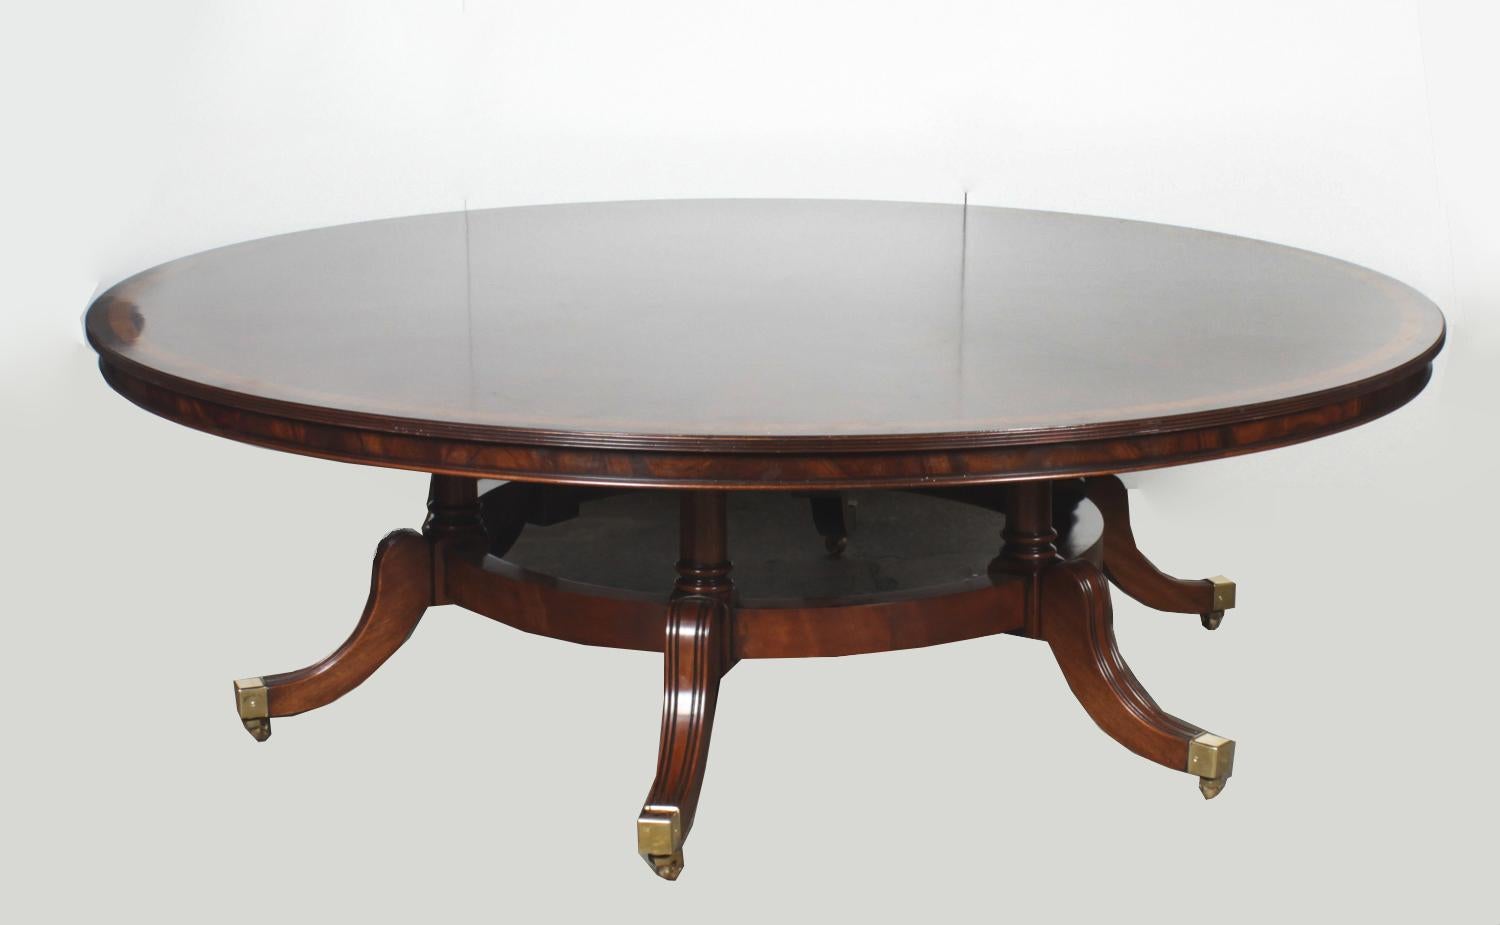 Vintage Flame Mahogany Regency Revival Dining Table, 20th C For Sale 10